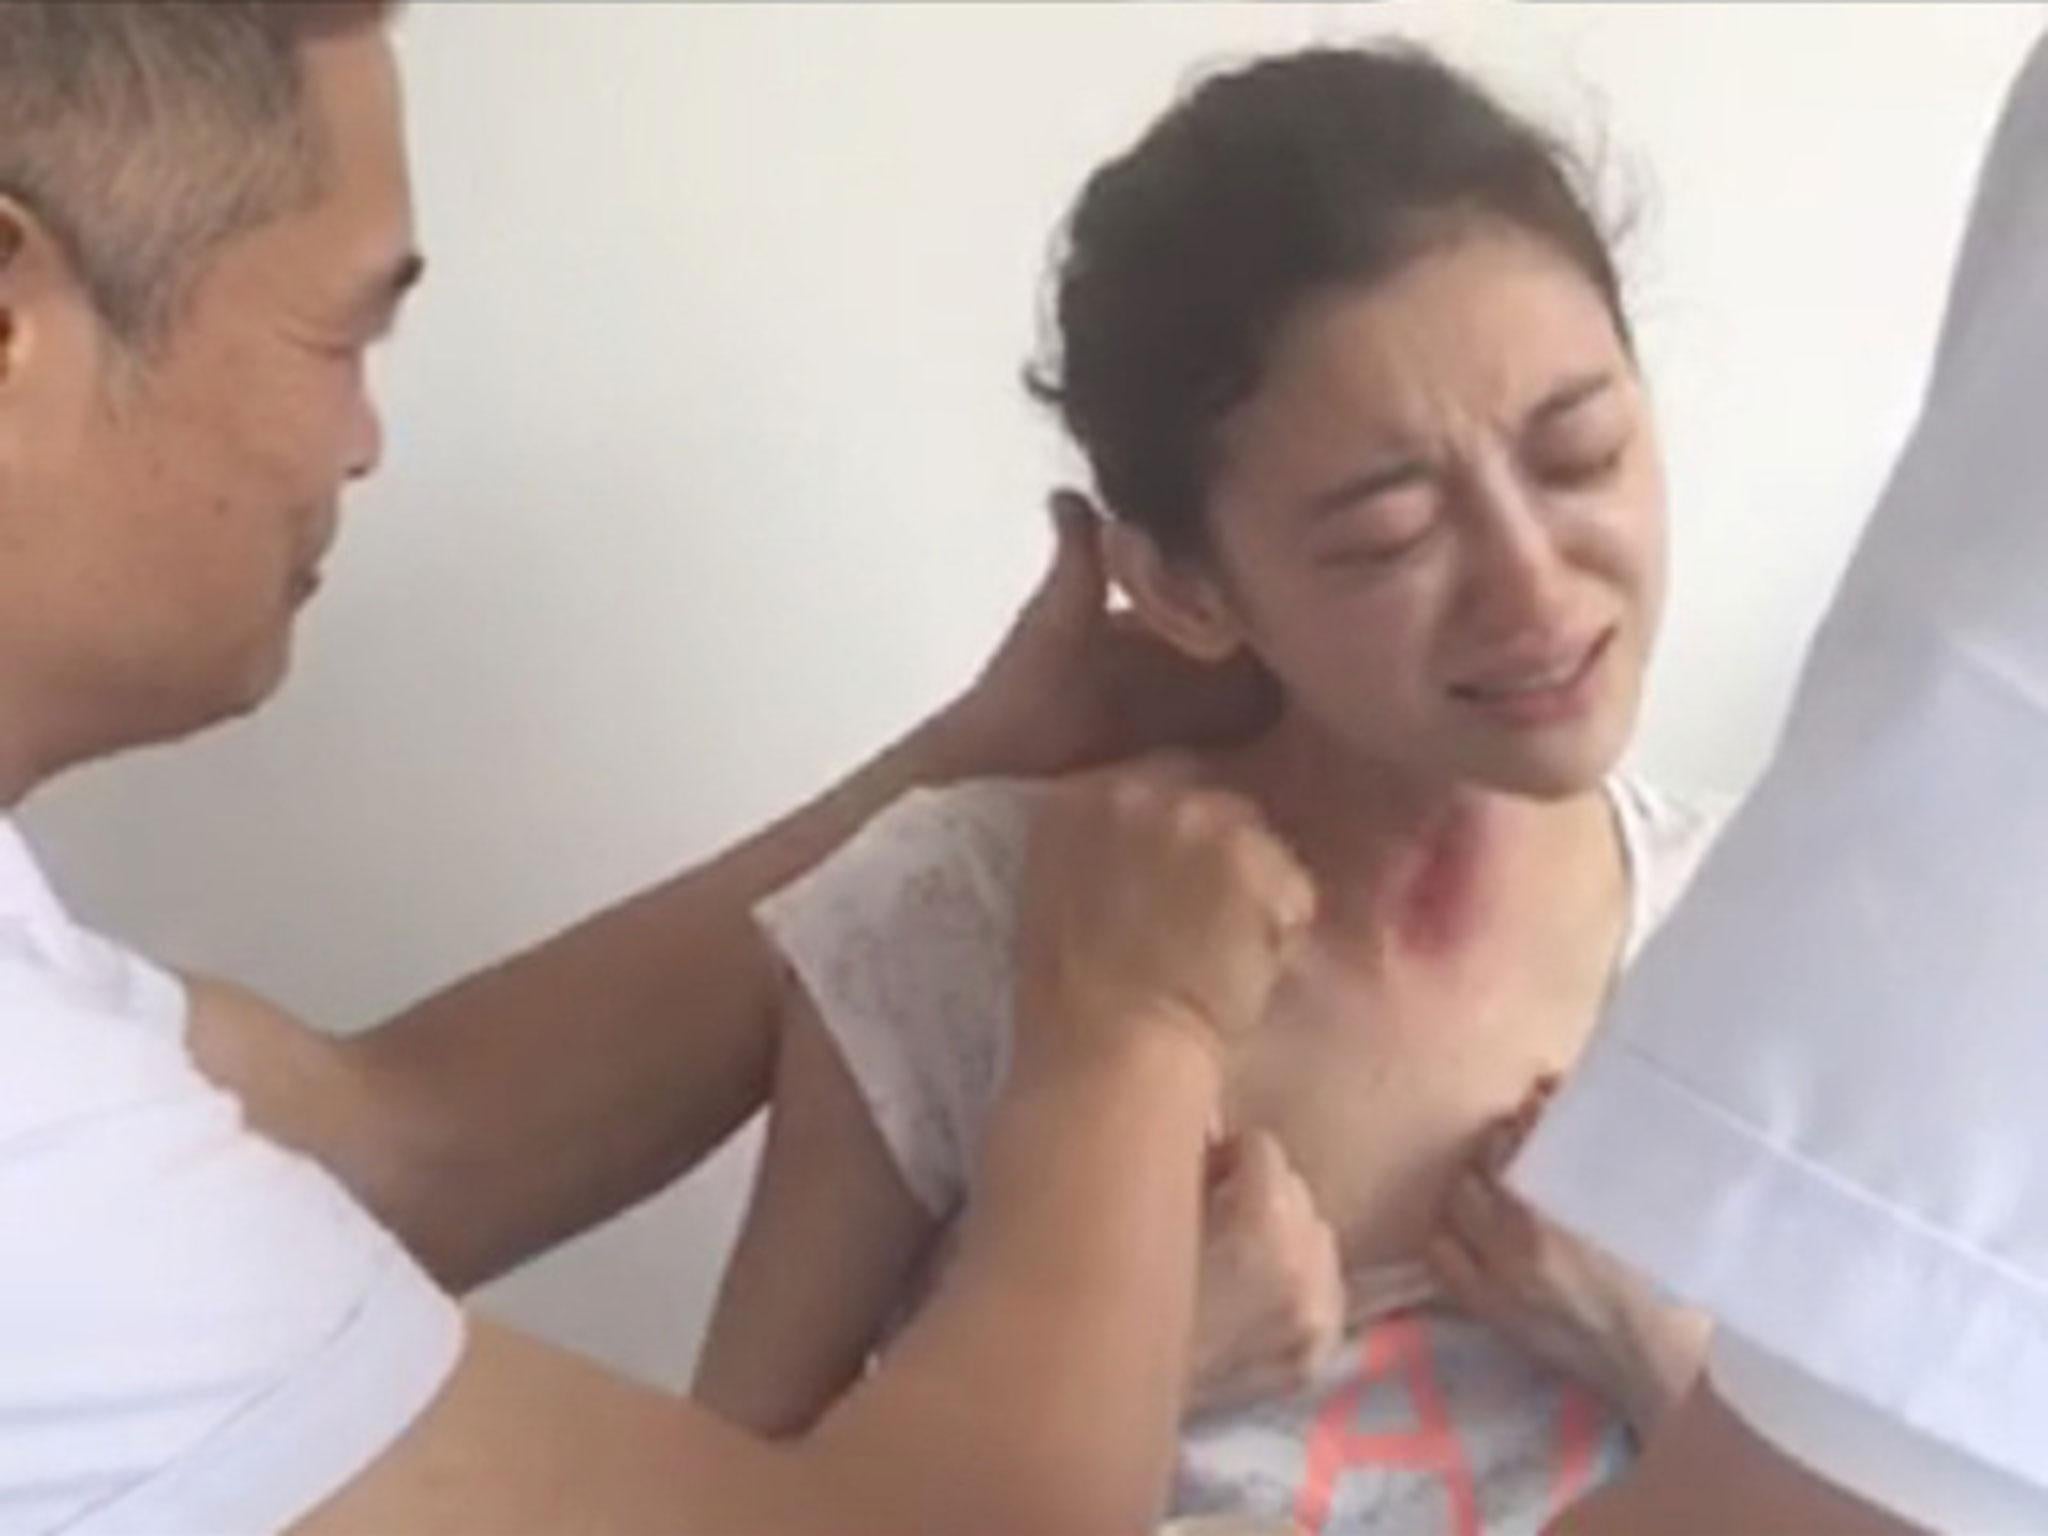 Other images show her undergoing gua sha skin scraping therapy